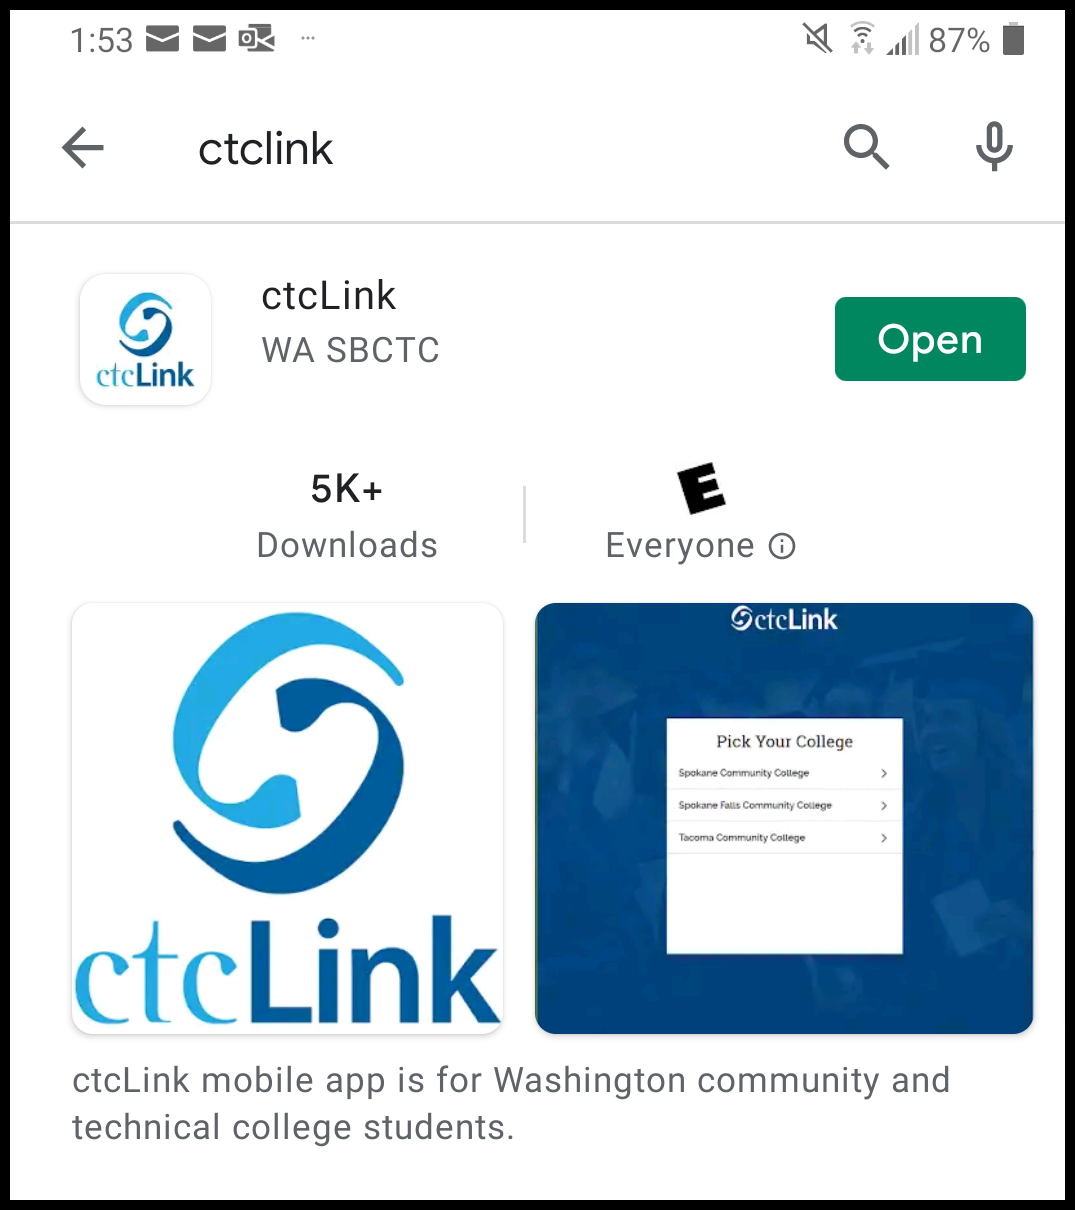 screen capture of ctcLink app as it appears on a mobile device - features ctcLinklogo and related information